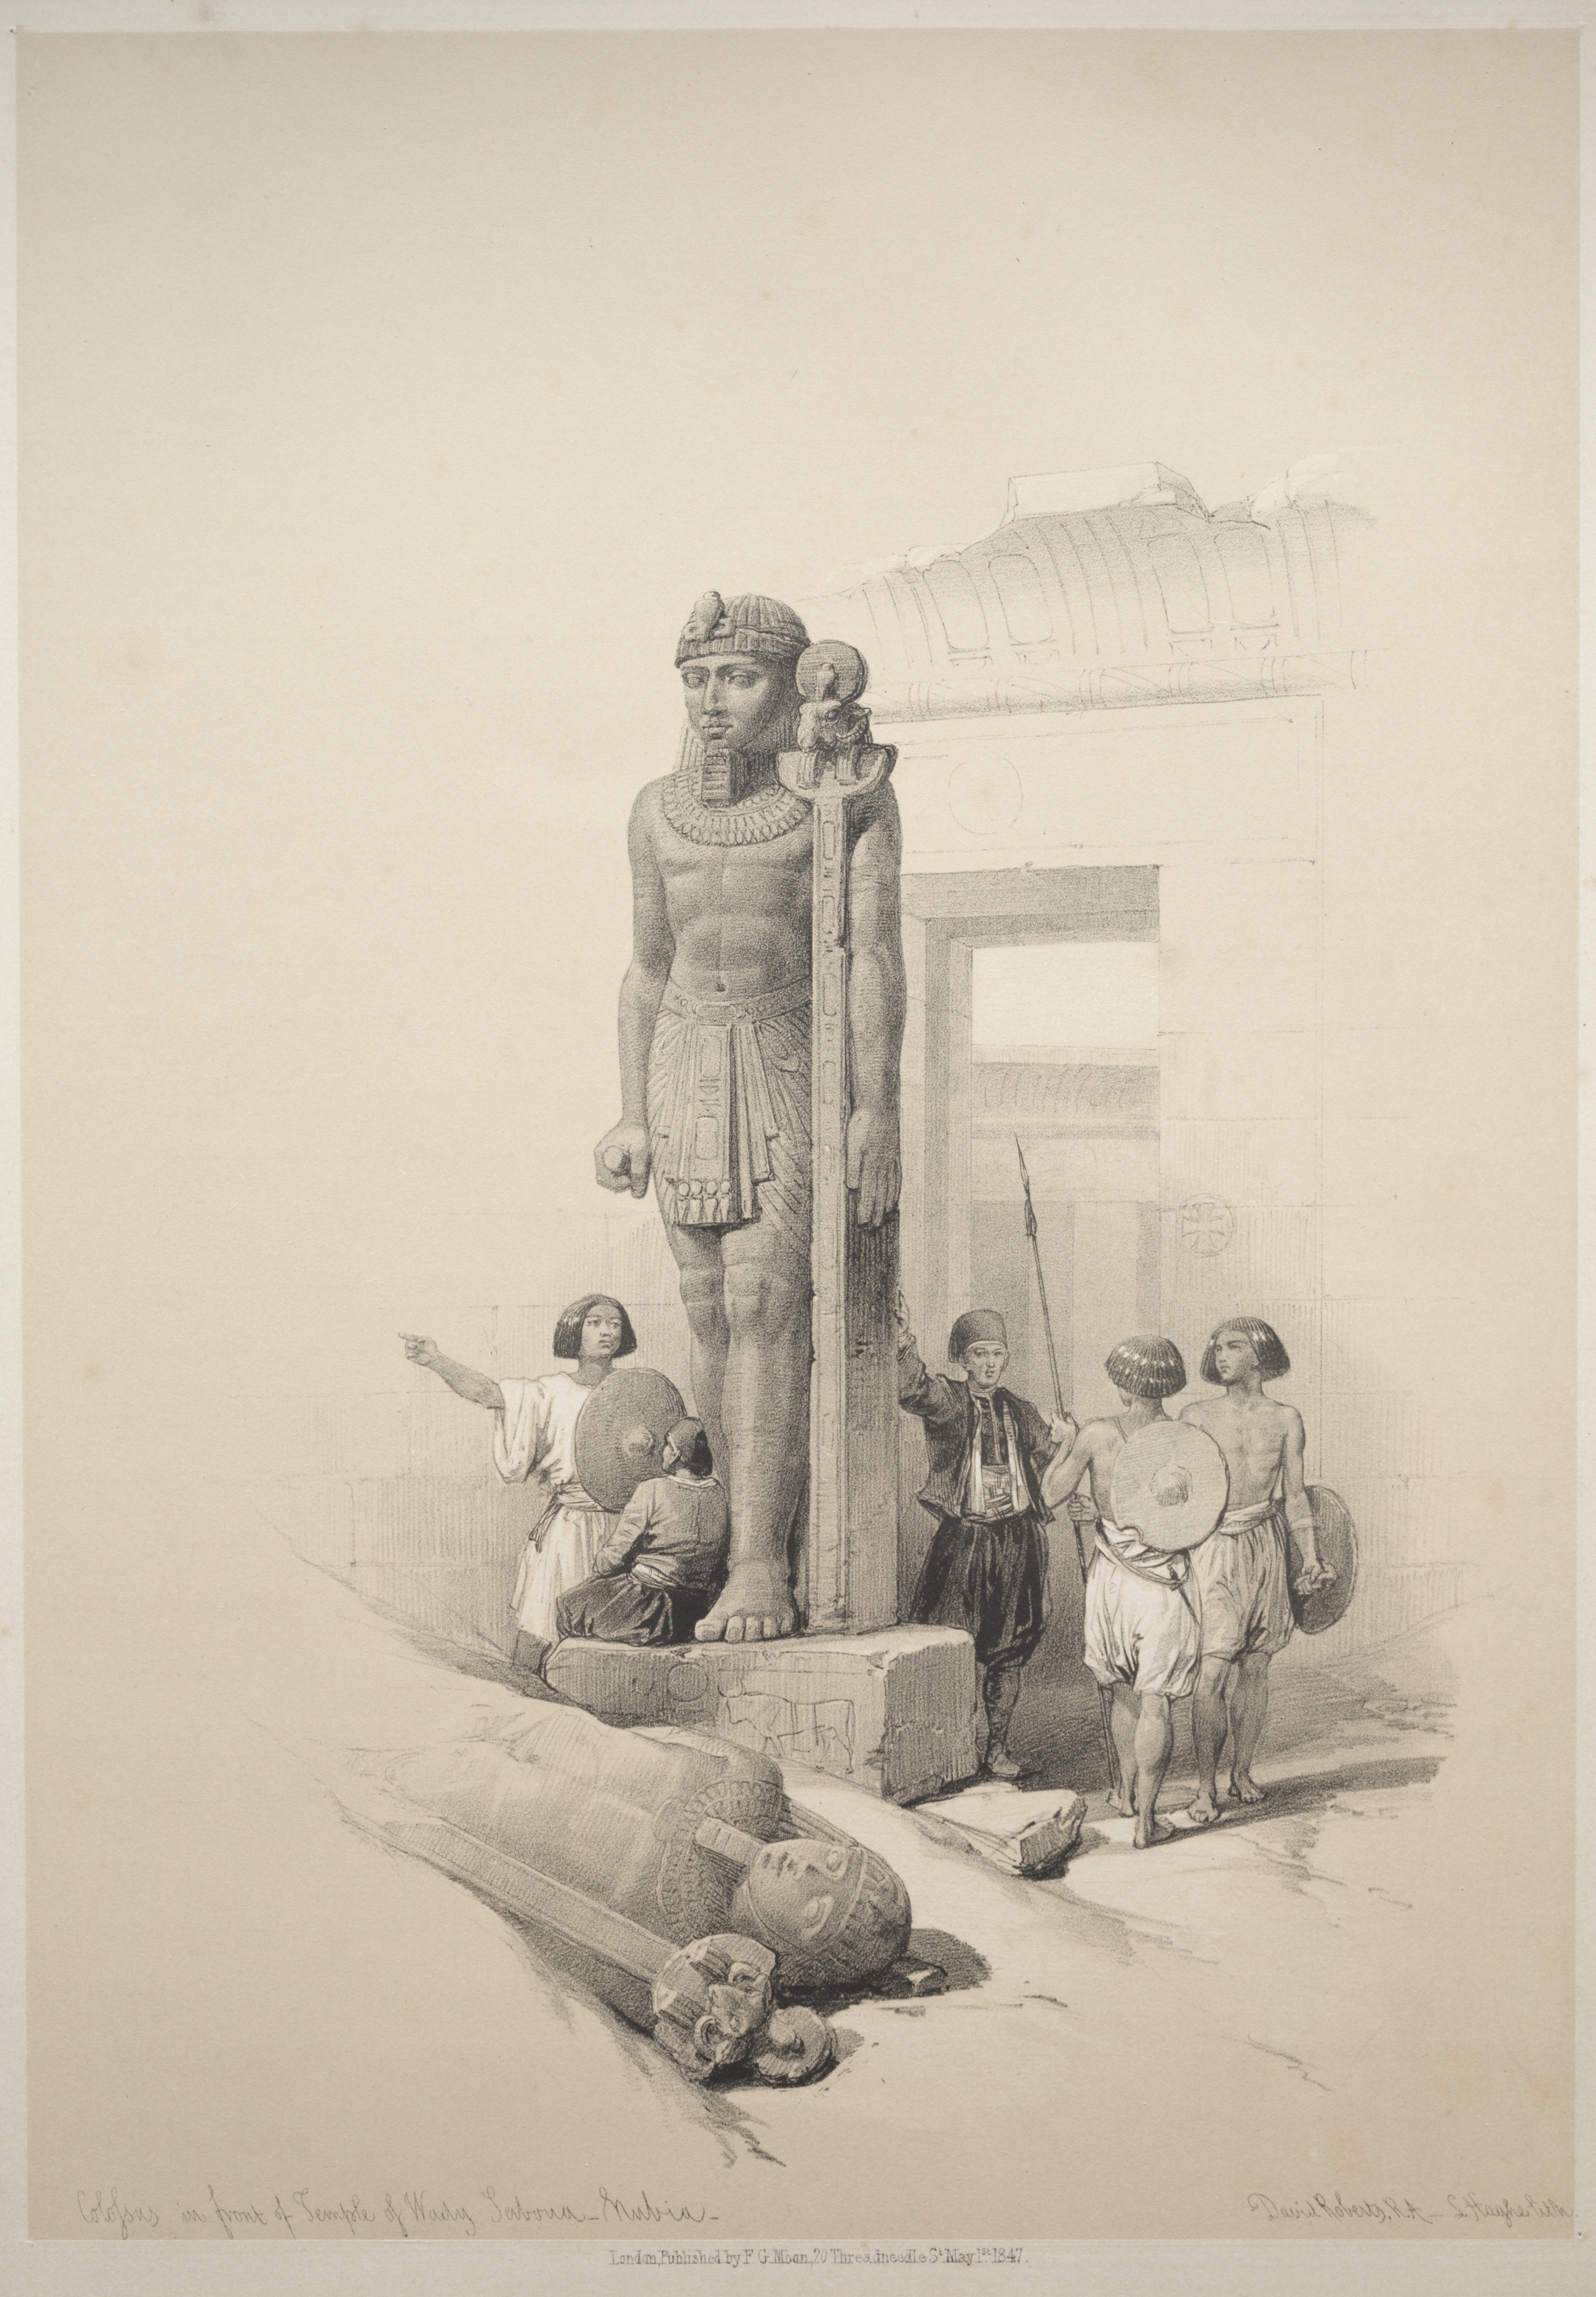 Egypt and Nubia:  Volume II - No. 7, Colossi at Wady Saboua